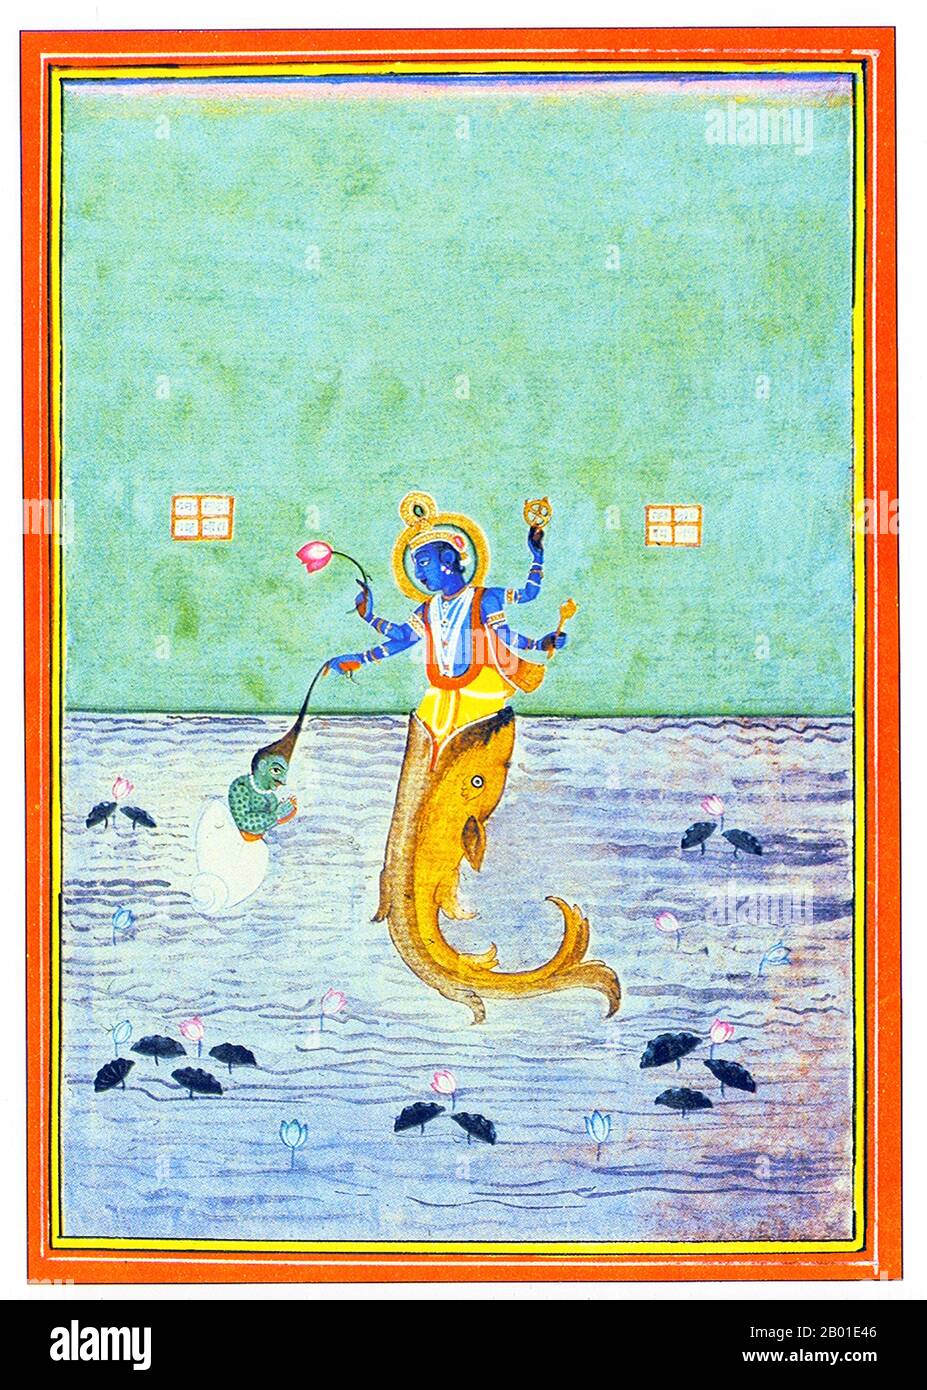 India: Lord Matsya, the first Avatar of Vishnu, rescuing Satyavrata. Painting, Uttar Pradesh, c. 1870.  According to the Matsya Purana, the king of pre-ancient Dravida and a devotee of Vishnu, Satyavrata, who later was known as Manu, was washing his hands in a river when a little fish swam into his hands and pleaded with him to save its life.  He put it in a jar, which it soon outgrew. He then moved it to a tank, a river and then finally the ocean but to no avail. The fish then revealed himself to be Vishnu and told him that a deluge would occur within seven days that would destroy all life. Stock Photo